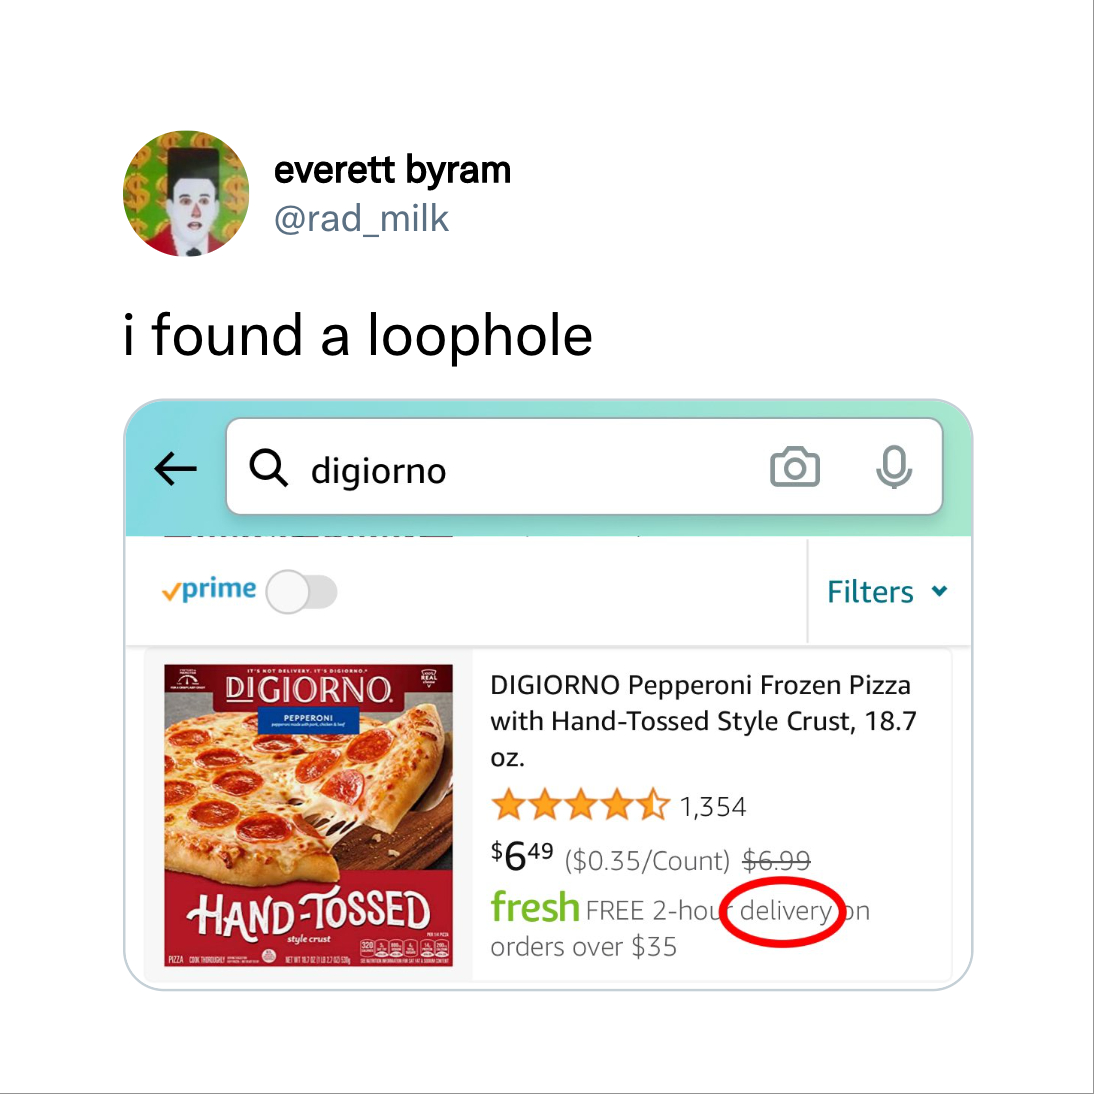 web page - everett byram i found a loophole Q digiorno o vprime Filters It'S Not Delivery, It' Bigiorno Real Digiorno. Digiorno Pepperoni Frozen Pizza with HandTossed Style Crust, 18.7 Pepperoni Oz. 1,354 $649 $0.35Count $6.99 fresh Free 2hout deliveryn o